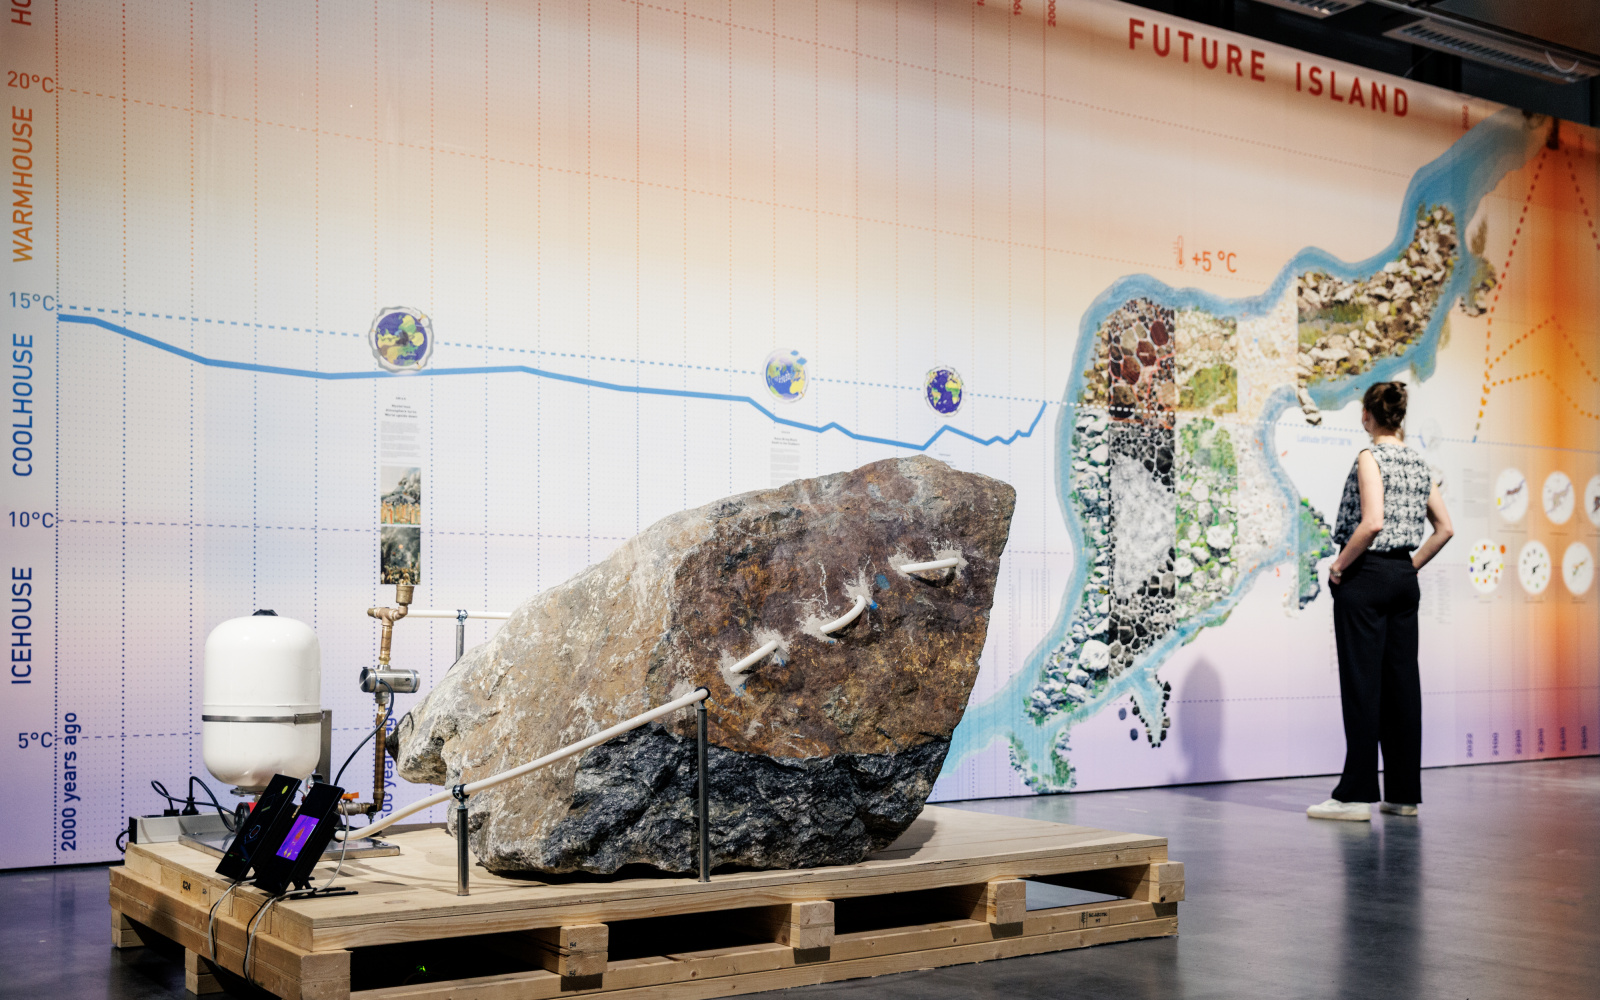 A young woman looks at the Mixed-Media-Installation »Future Island, The Time of Stone«